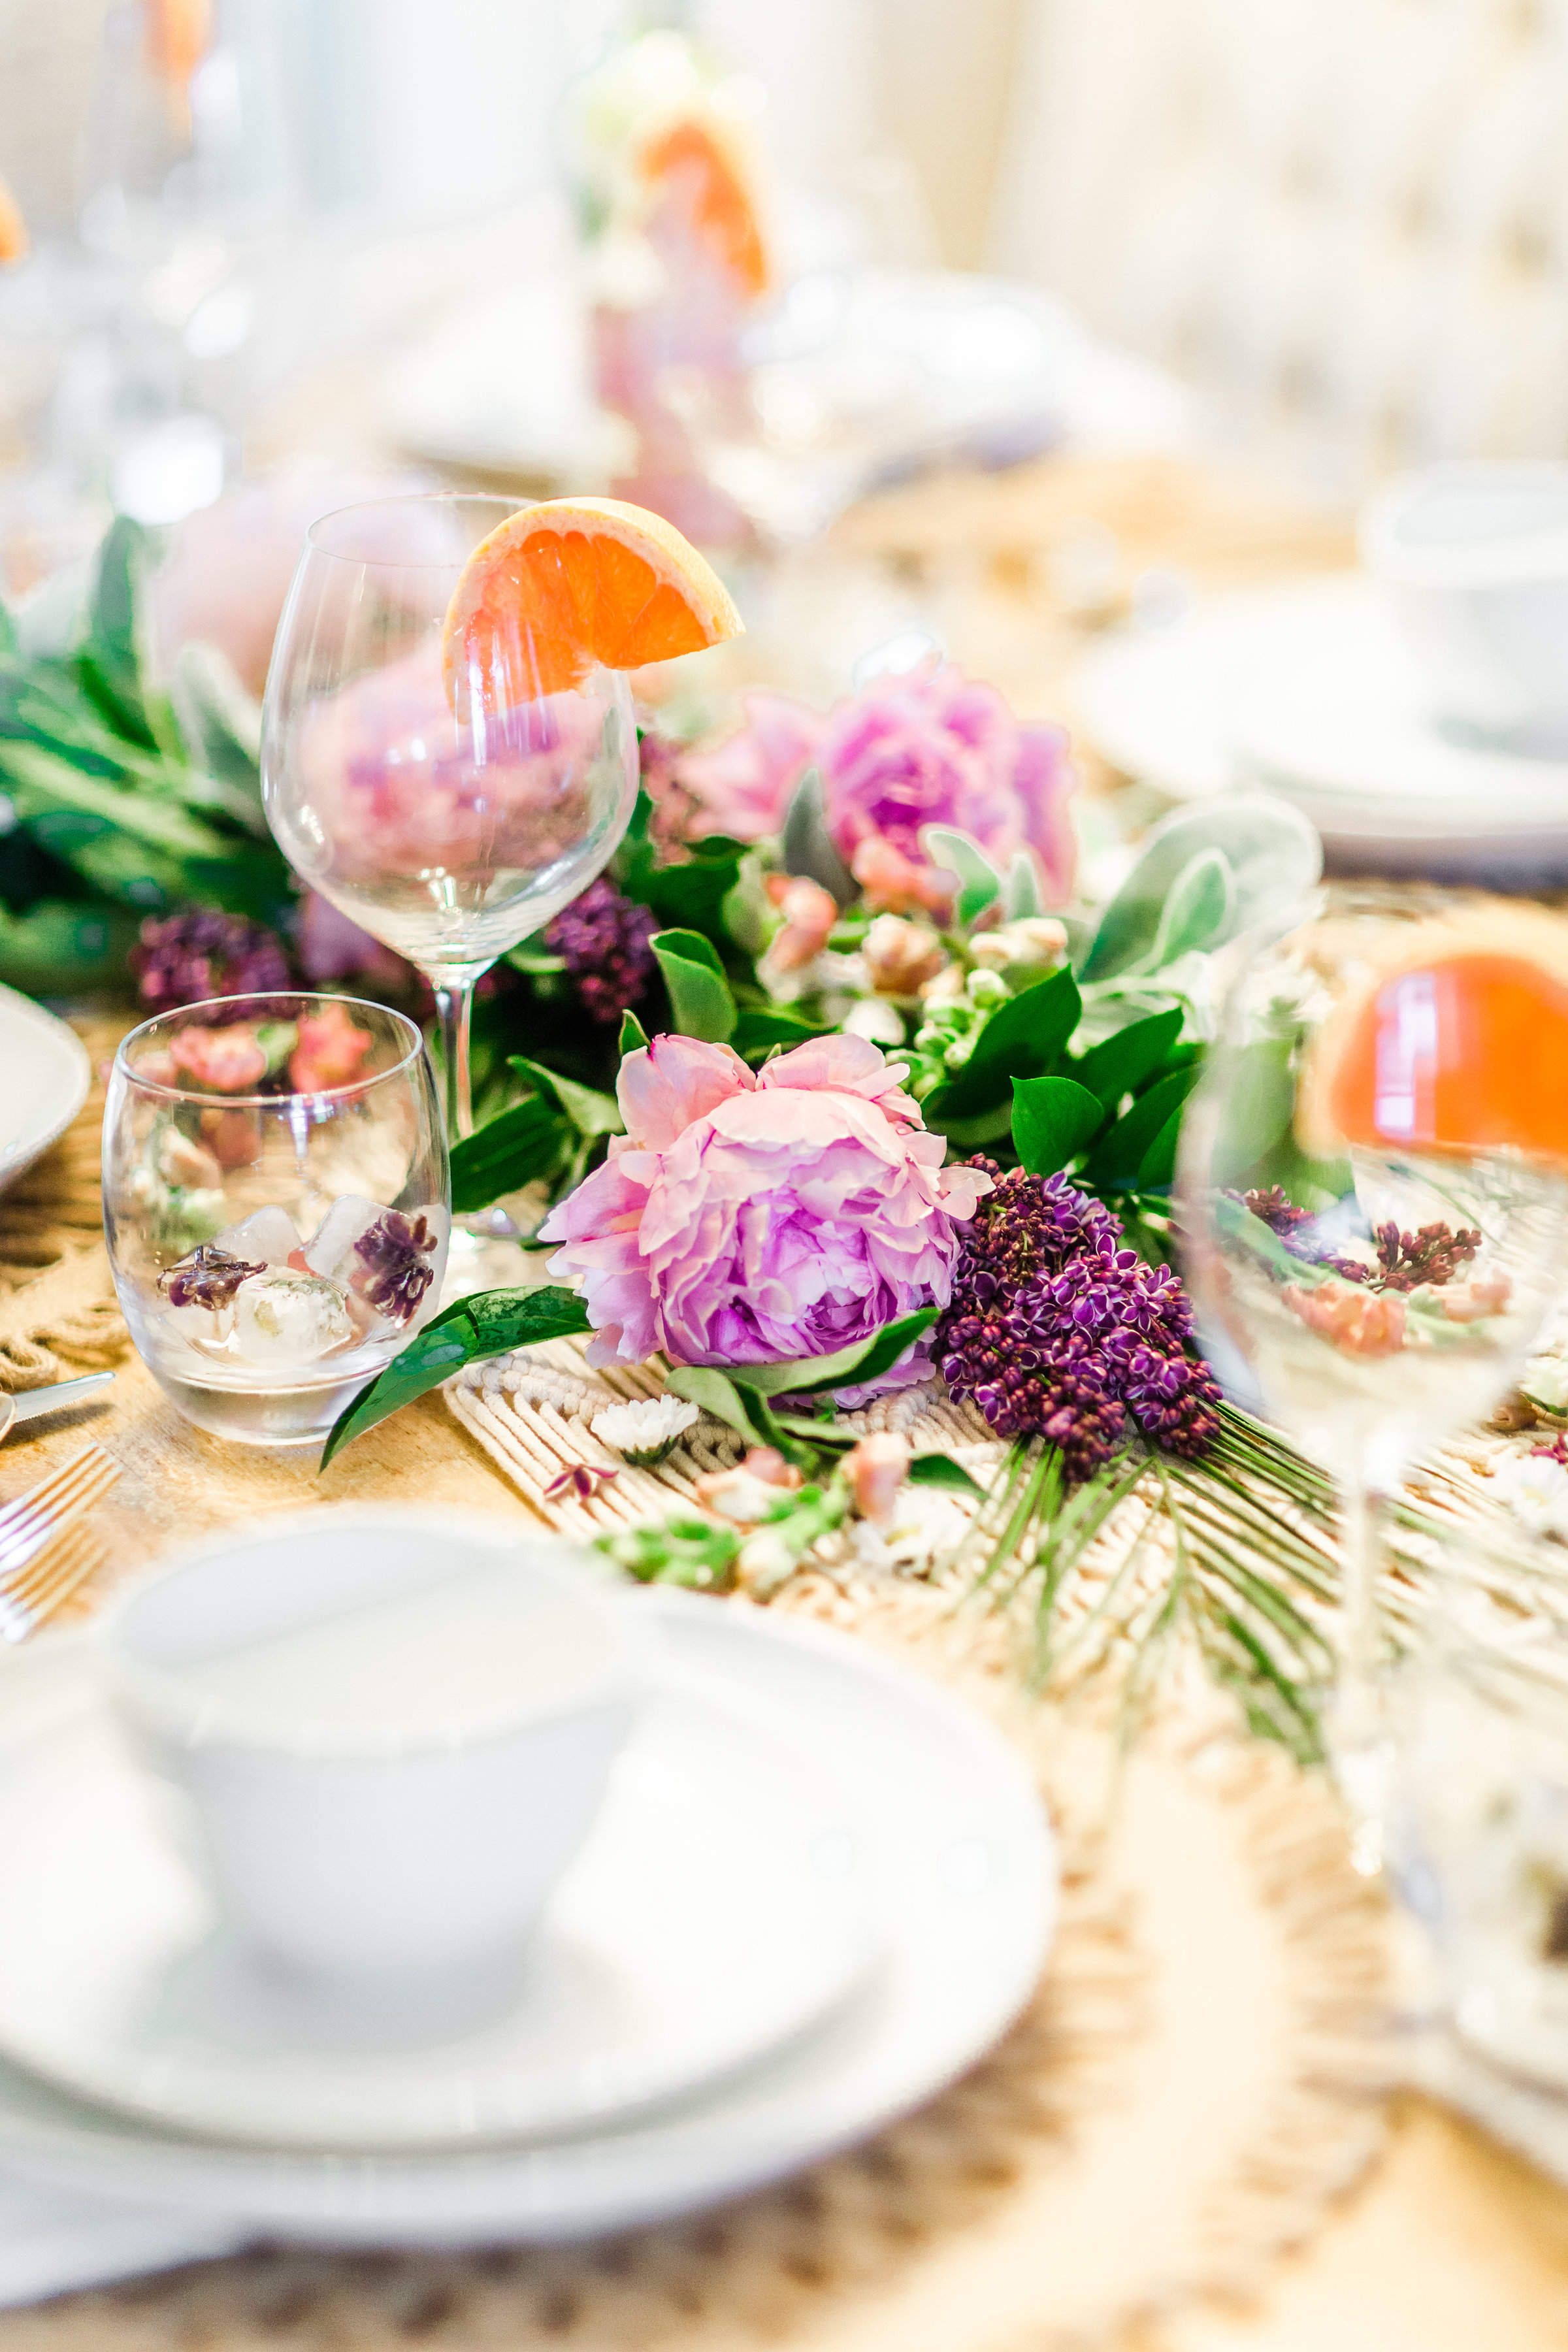 Lifestyle and Entertaining blogger Lexi of Glitter, Inc. shares her 5 Steps to An Unforgettable, Easy and Chic Summer Brunch. | glitterinc.com | @glitterinc